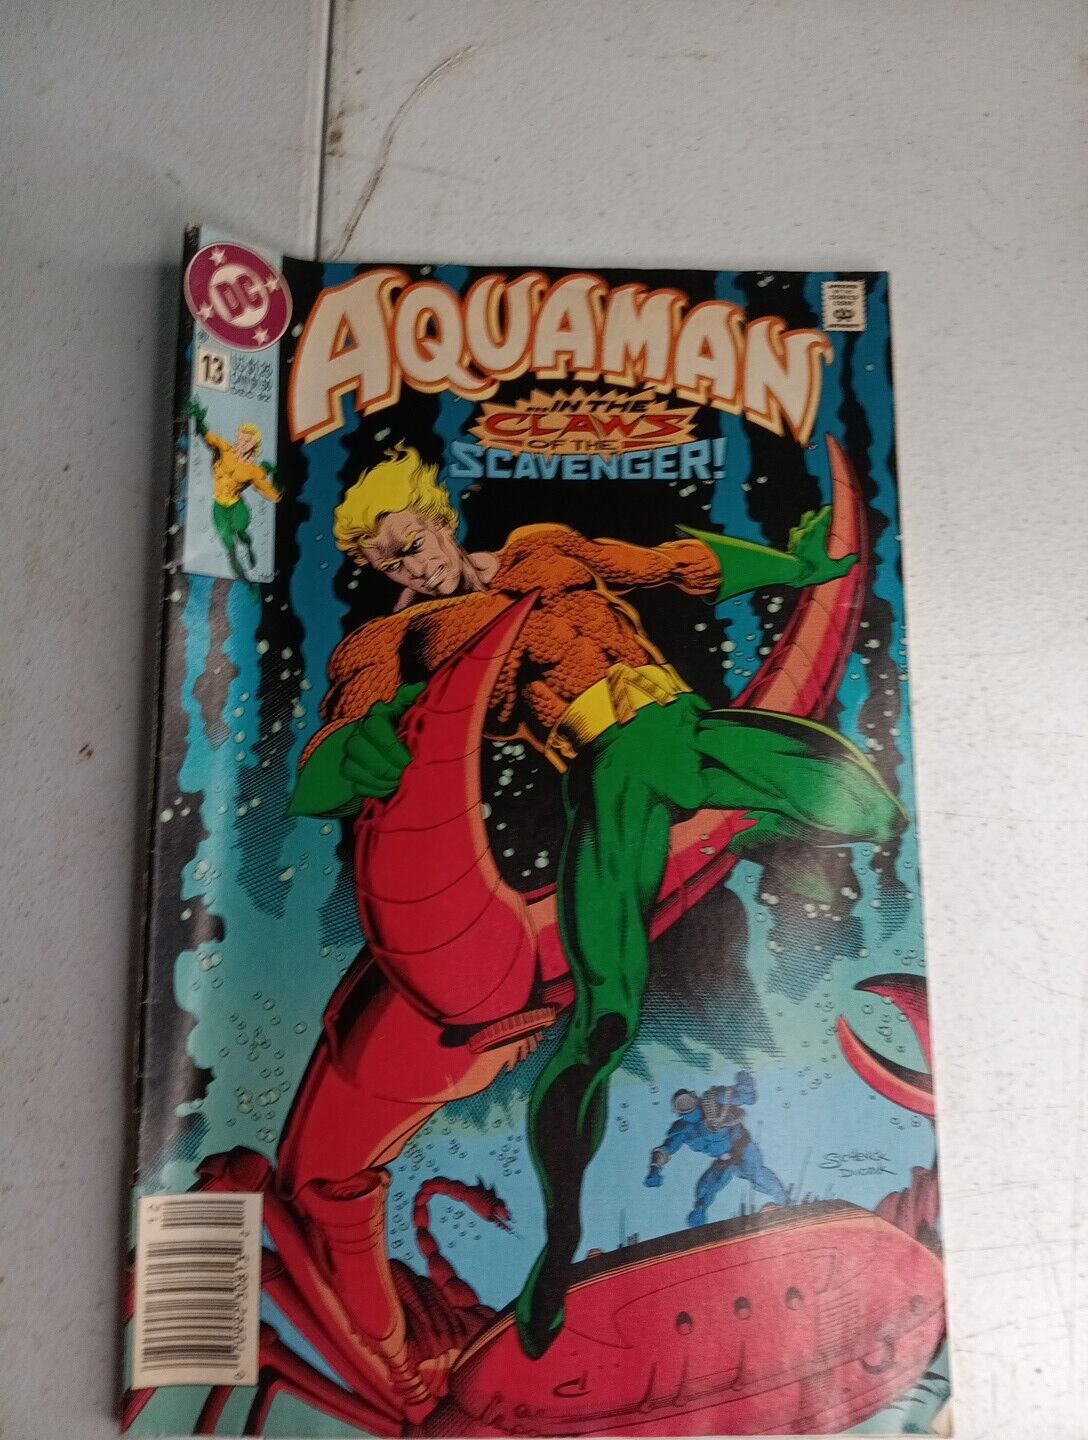 AQUAMAN #13* In The Claws Of The scavenger 1992